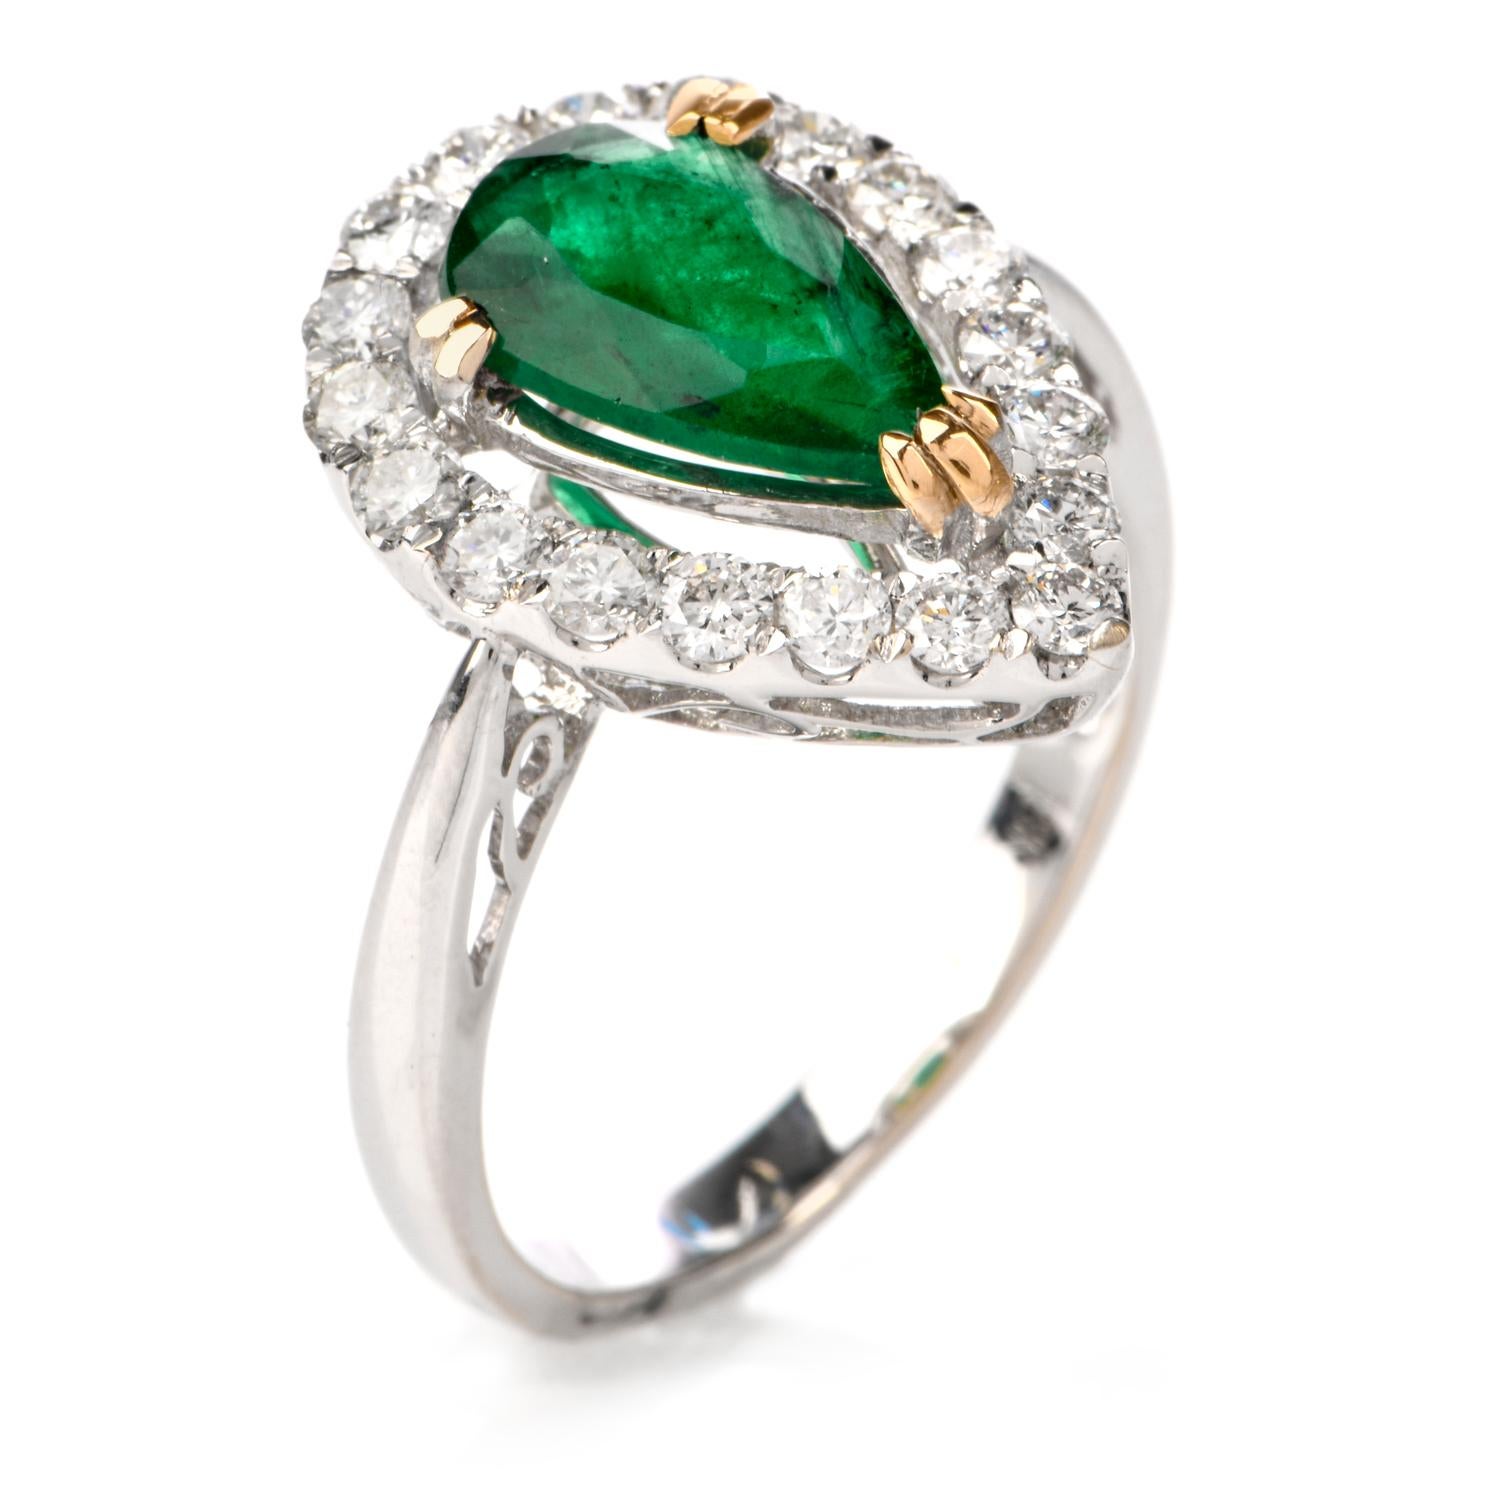 This elegant emerald and diamond ring is crafted in solid 18-karat white gold, weighing 3.9 grams and measuring 17mm x 6mm high. Composed of one prong-set pear shaped genuine emerald, weighing approximately, 1.12 carats. Surrounded by a pear shaped